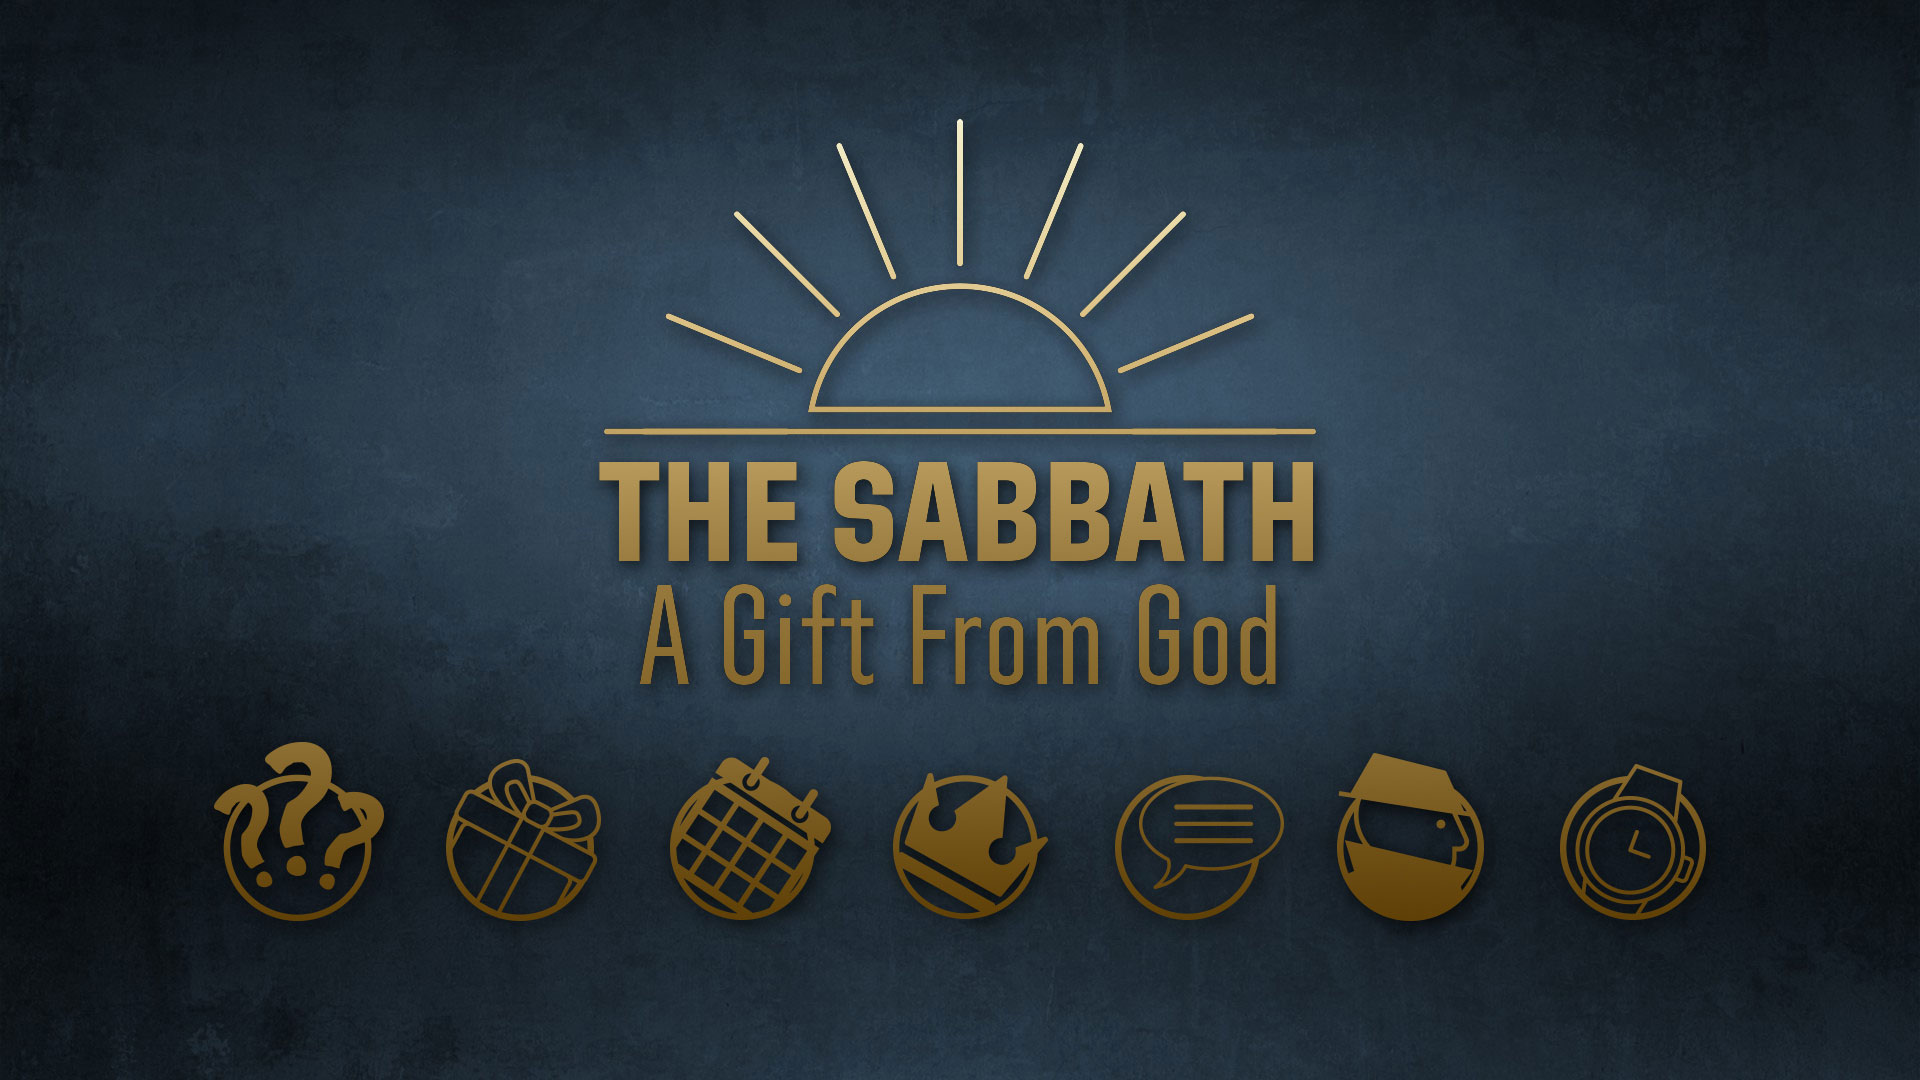 The Sabbath: A Gift From God